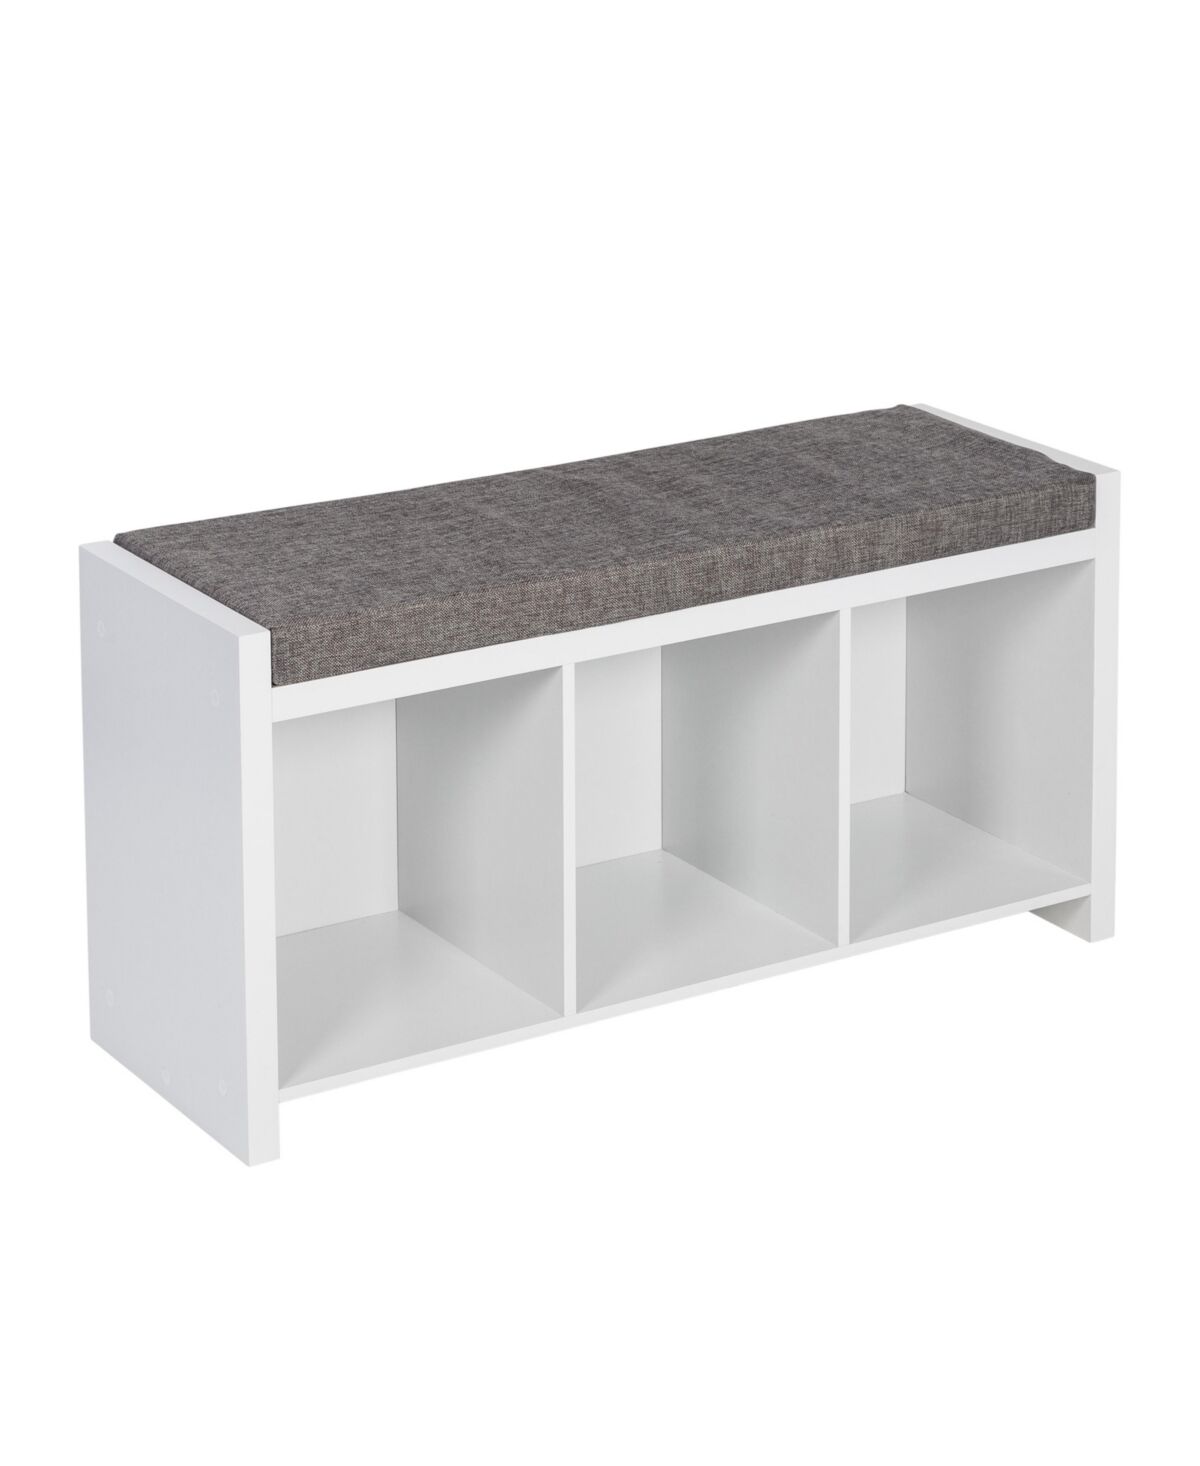 Honey Can Do Cube Organizer Bench with Shoe Storage and Seat Cushion - White